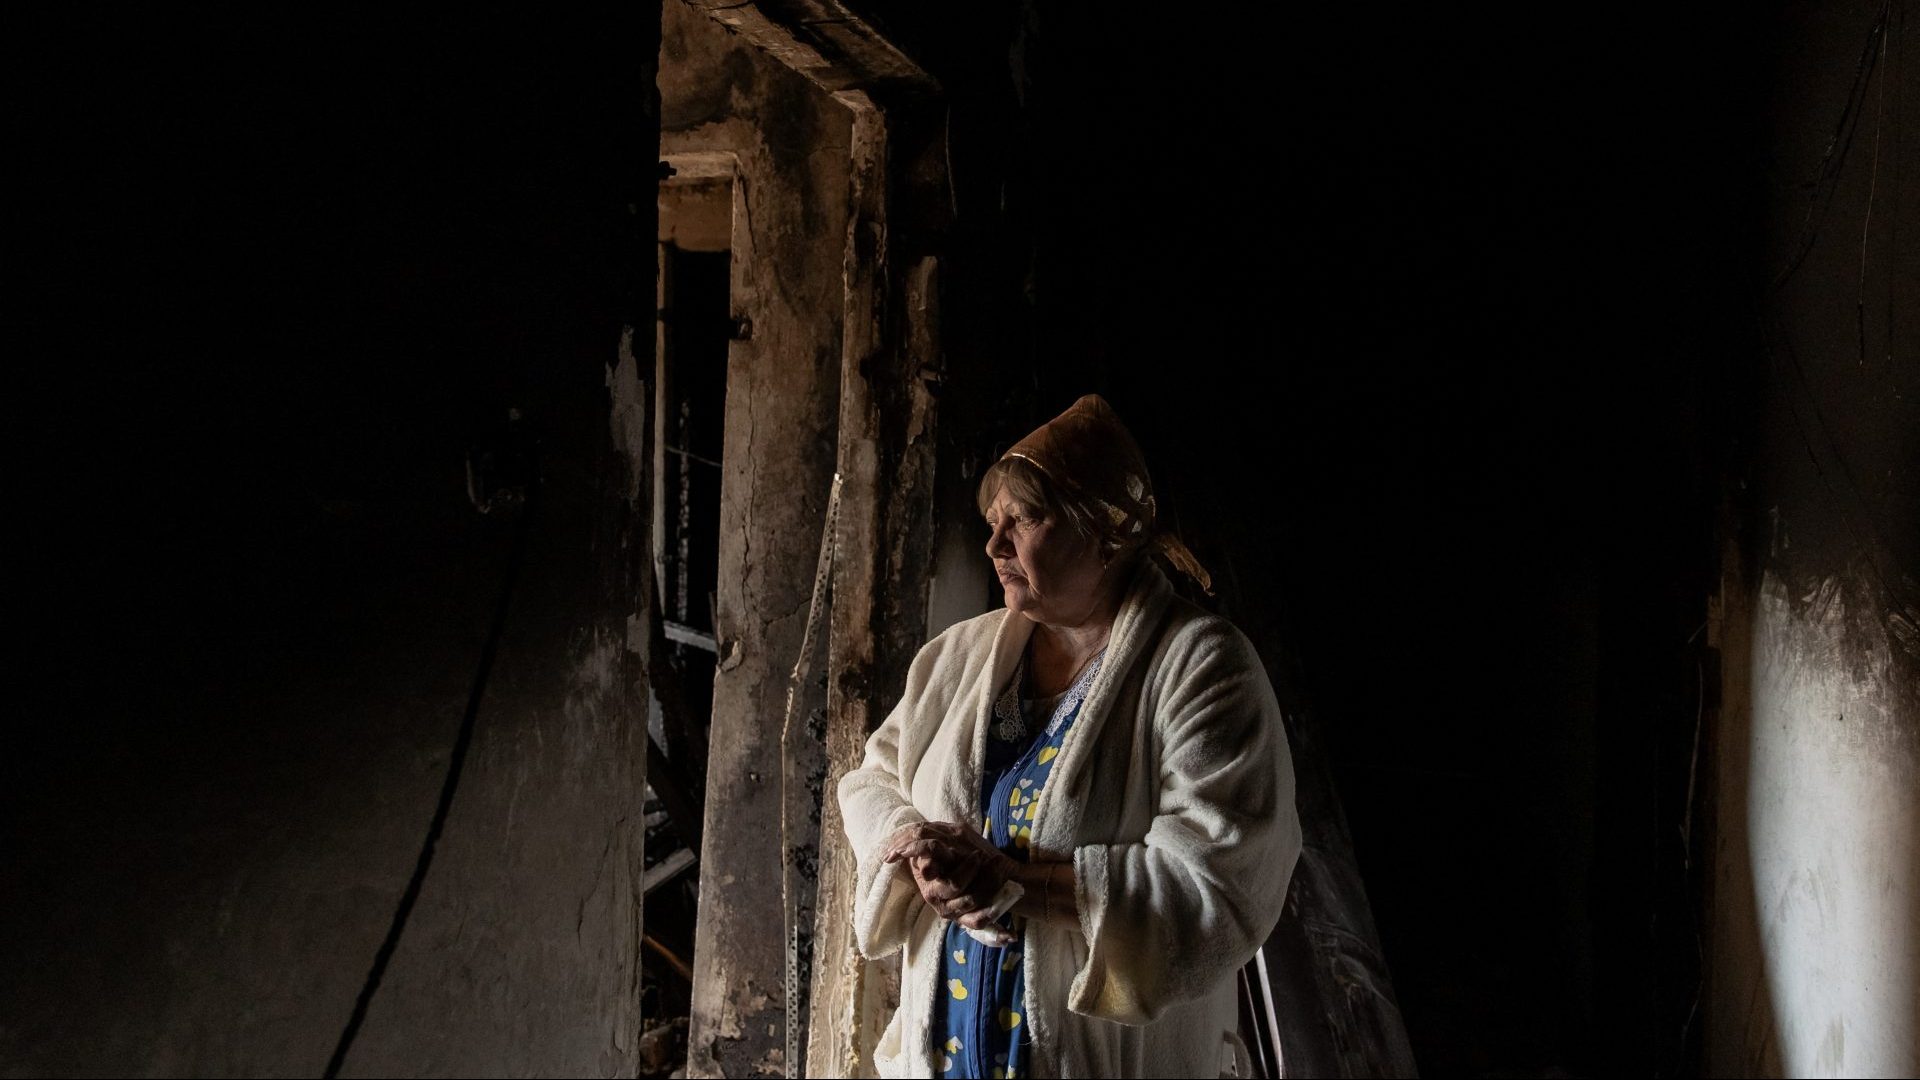 Natalia, whose elderly mother was killed during an overnight Russian attack stands in the damaged apartment where they both lived, in the southern city of Kherson, on October 30, 2023, amid the Russian invasion of Ukraine. Photo: ROMAN PILIPEY/AFP via Getty Images